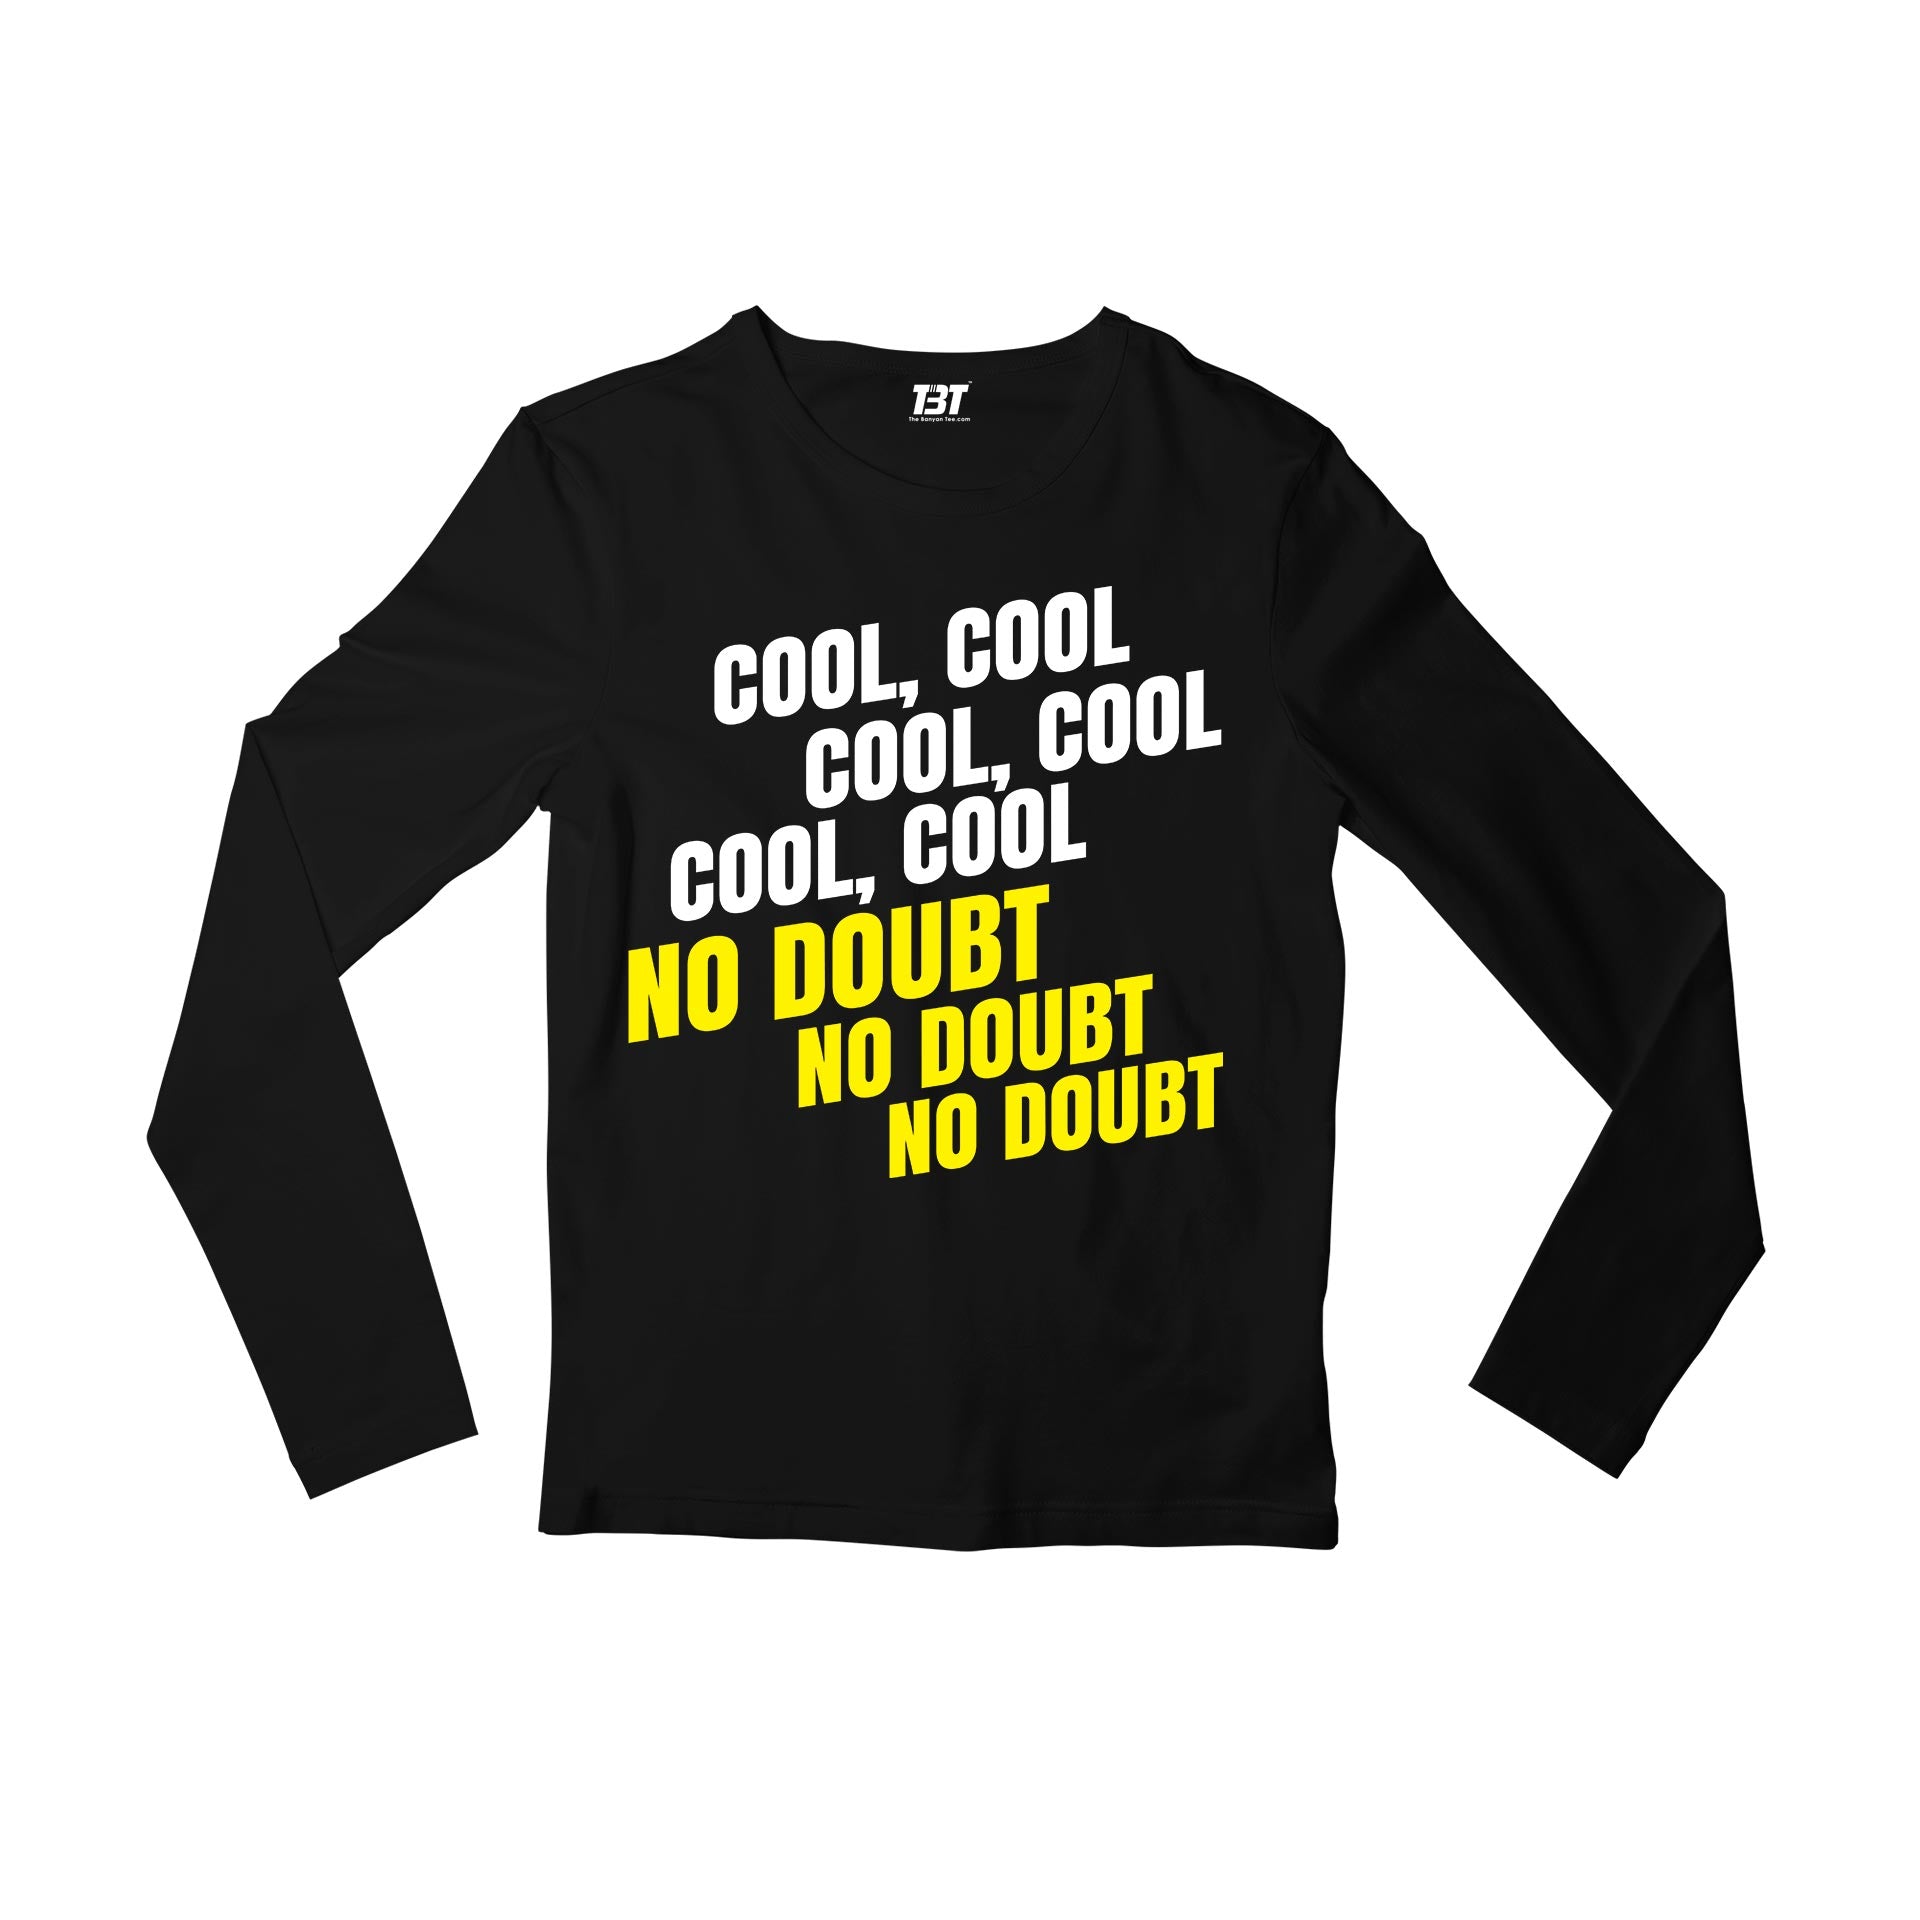 brooklyn nine-nine cool cool cool no doubt no doubt no doubt full sleeves long sleeves buy online india the banyan tee tbt men women girls boys unisex black detective jake peralta terry charles boyle gina linetti andy samberg merchandise clothing acceessories